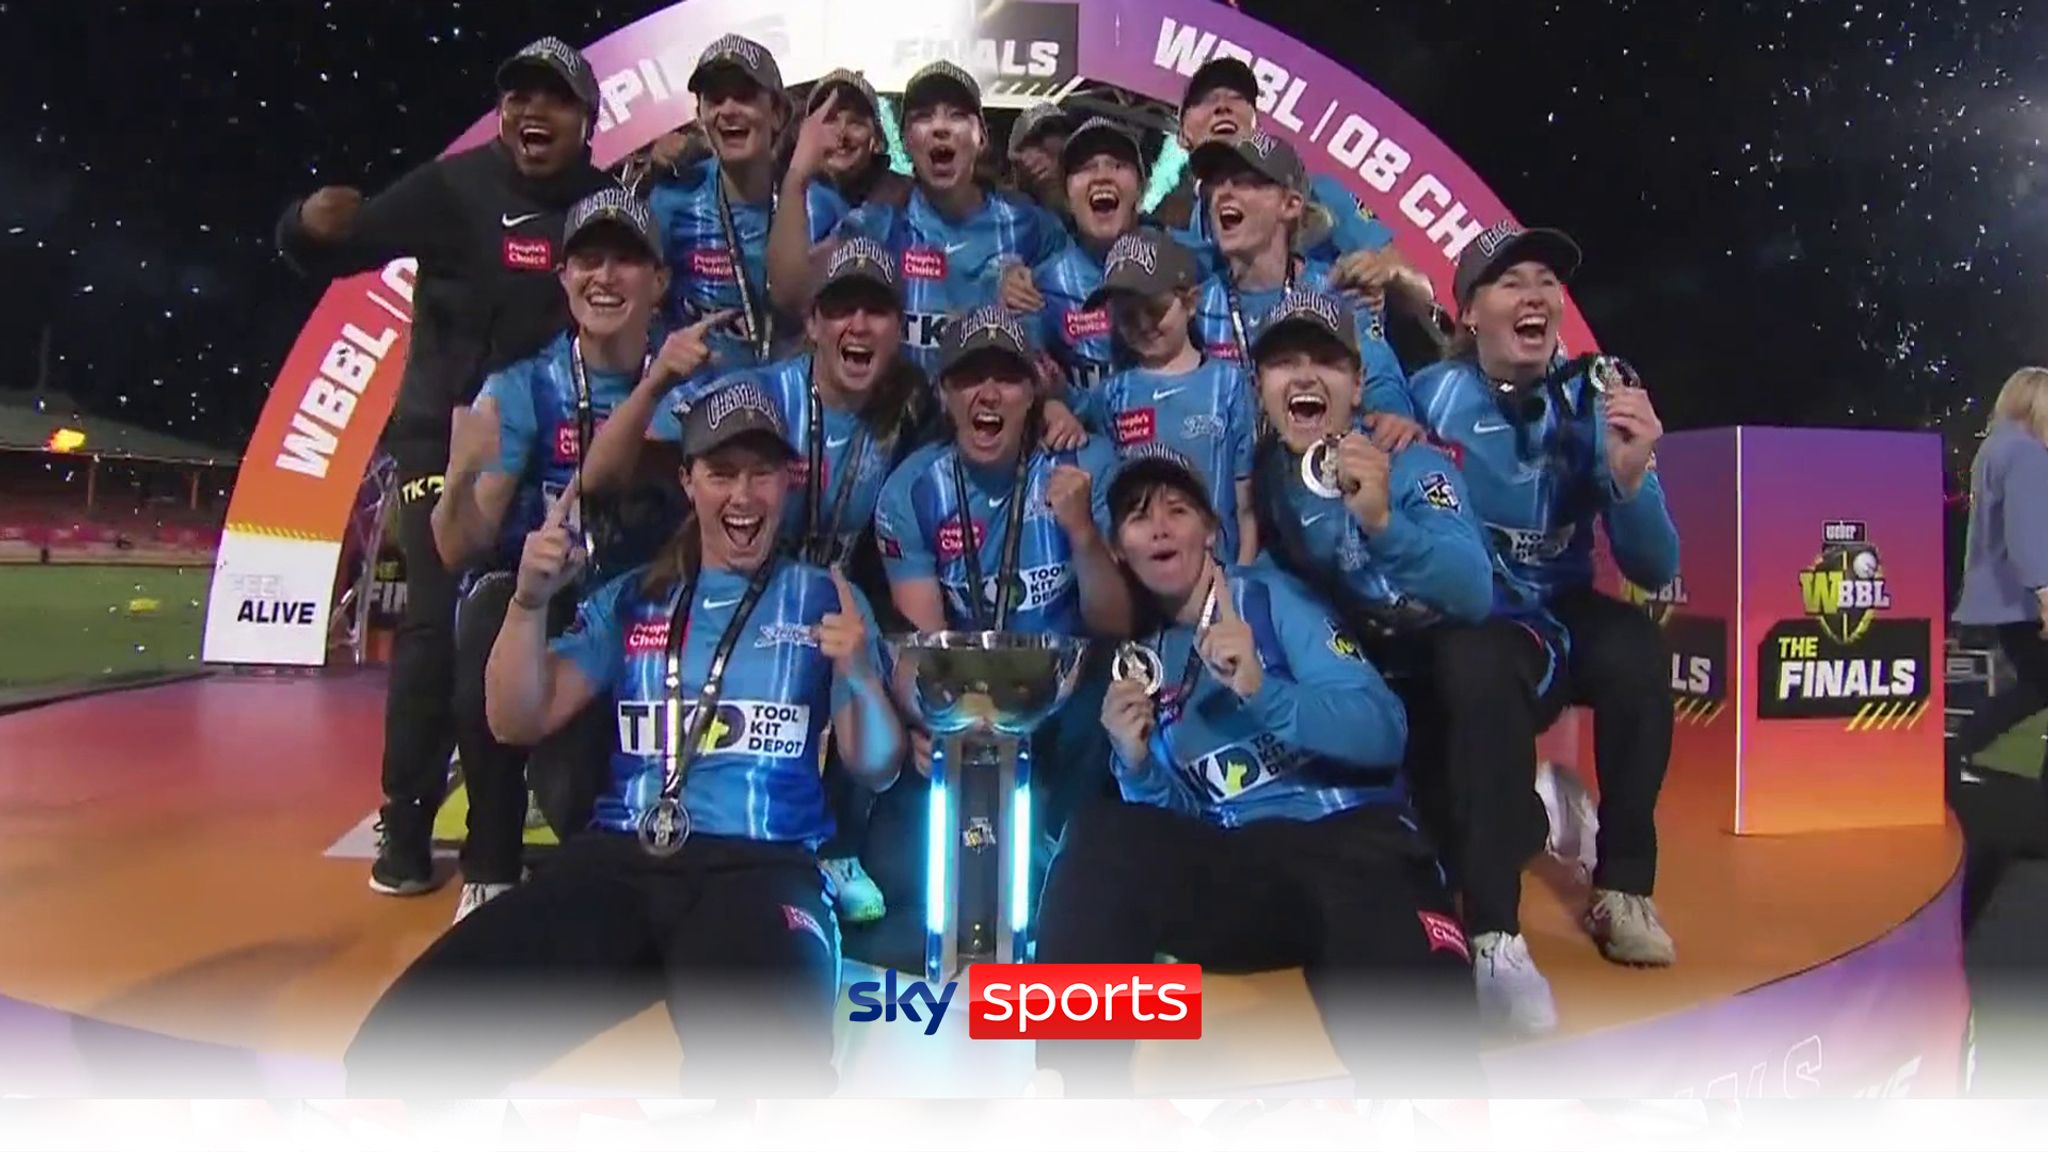 Womens Big Bash League Final Adelaide Strikers beat Sydney Sixers by 10 runs Video Watch TV Show Sky Sports